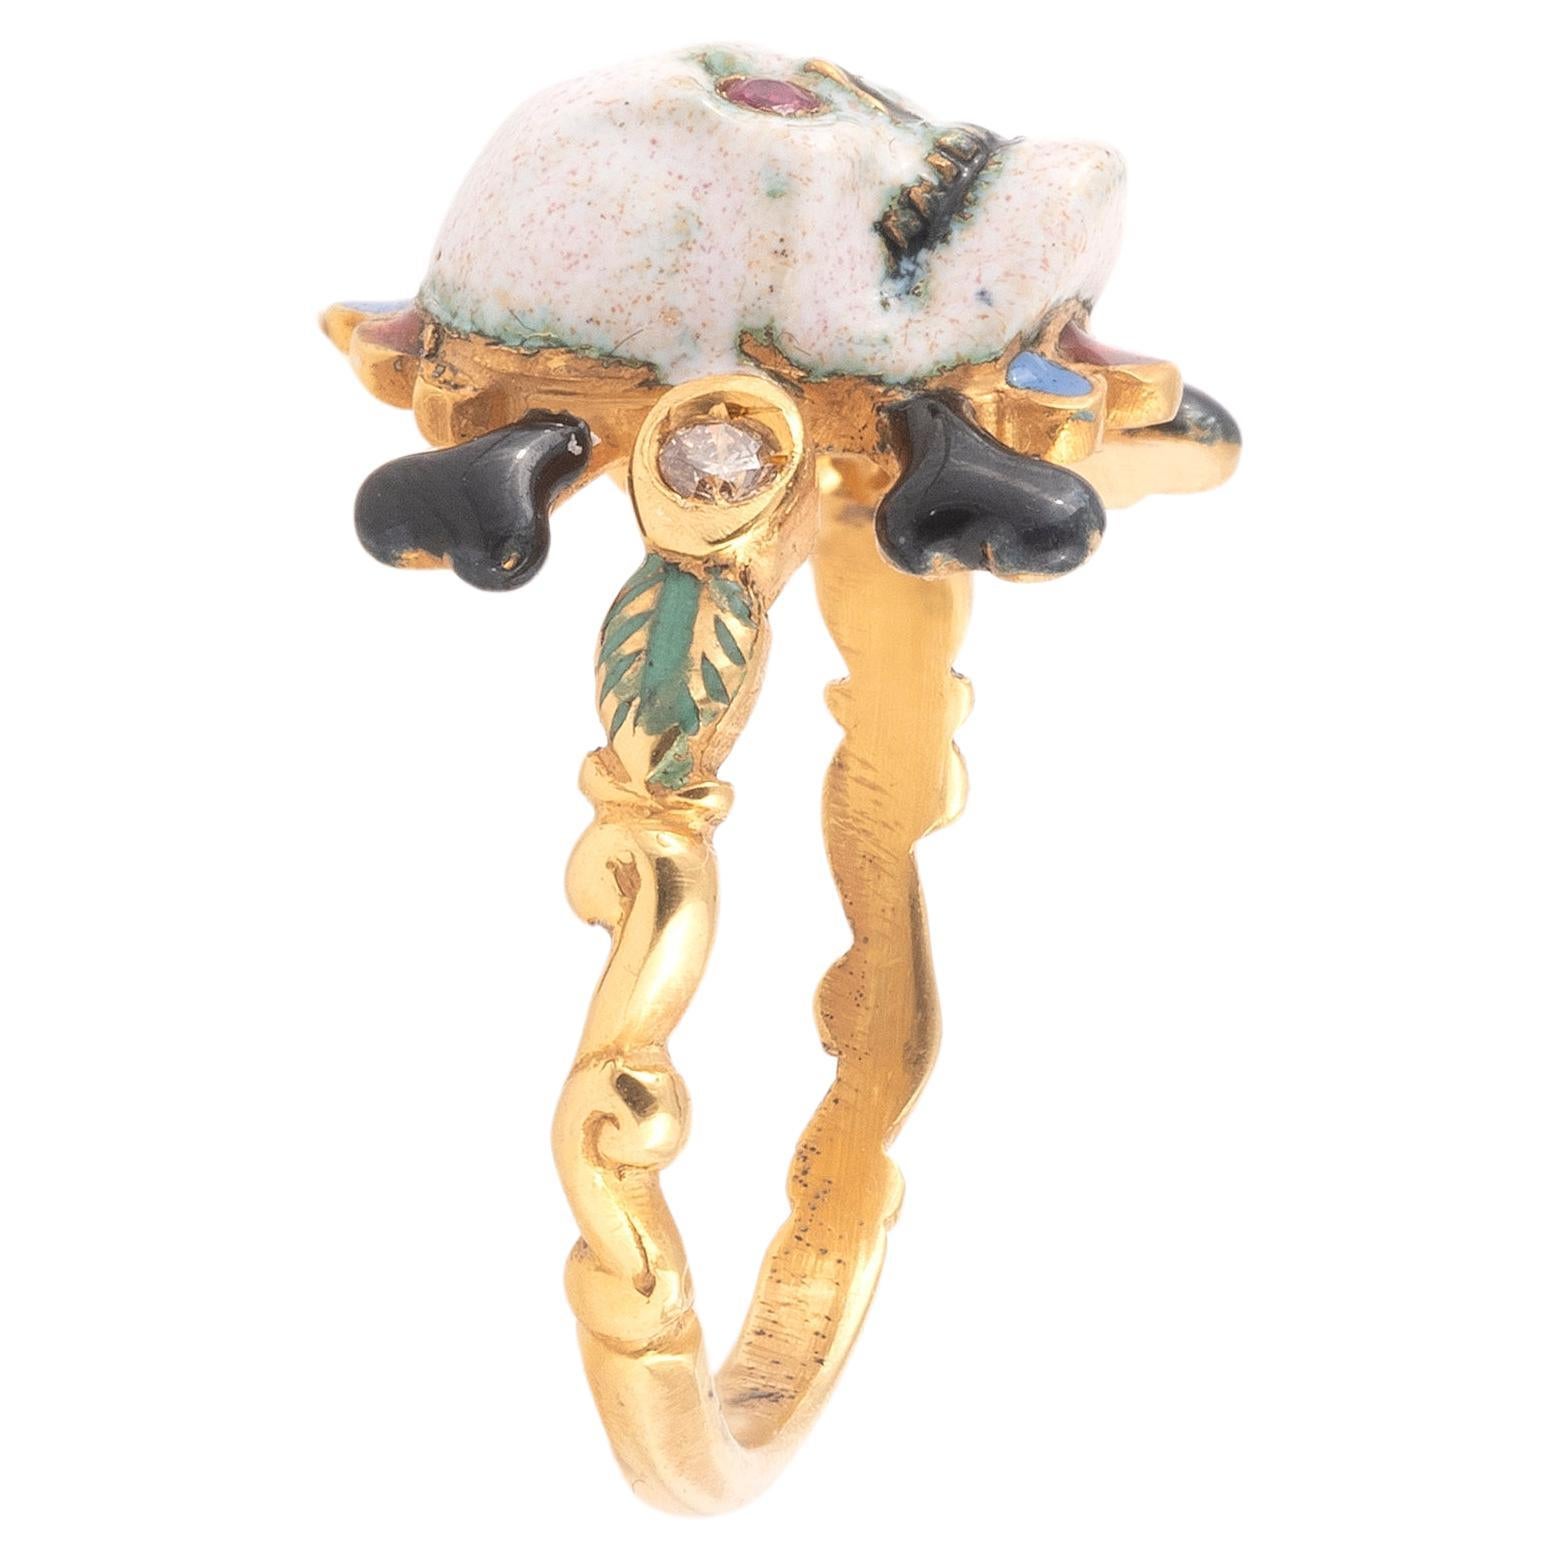 Renaissance style Memento Mori skull ring made with champleve multicolored enamels and rubies eyes.
Mounted in 18Kt gold
Signed A. Codognato
Weight: 5.8 gr
Finger size: 7

